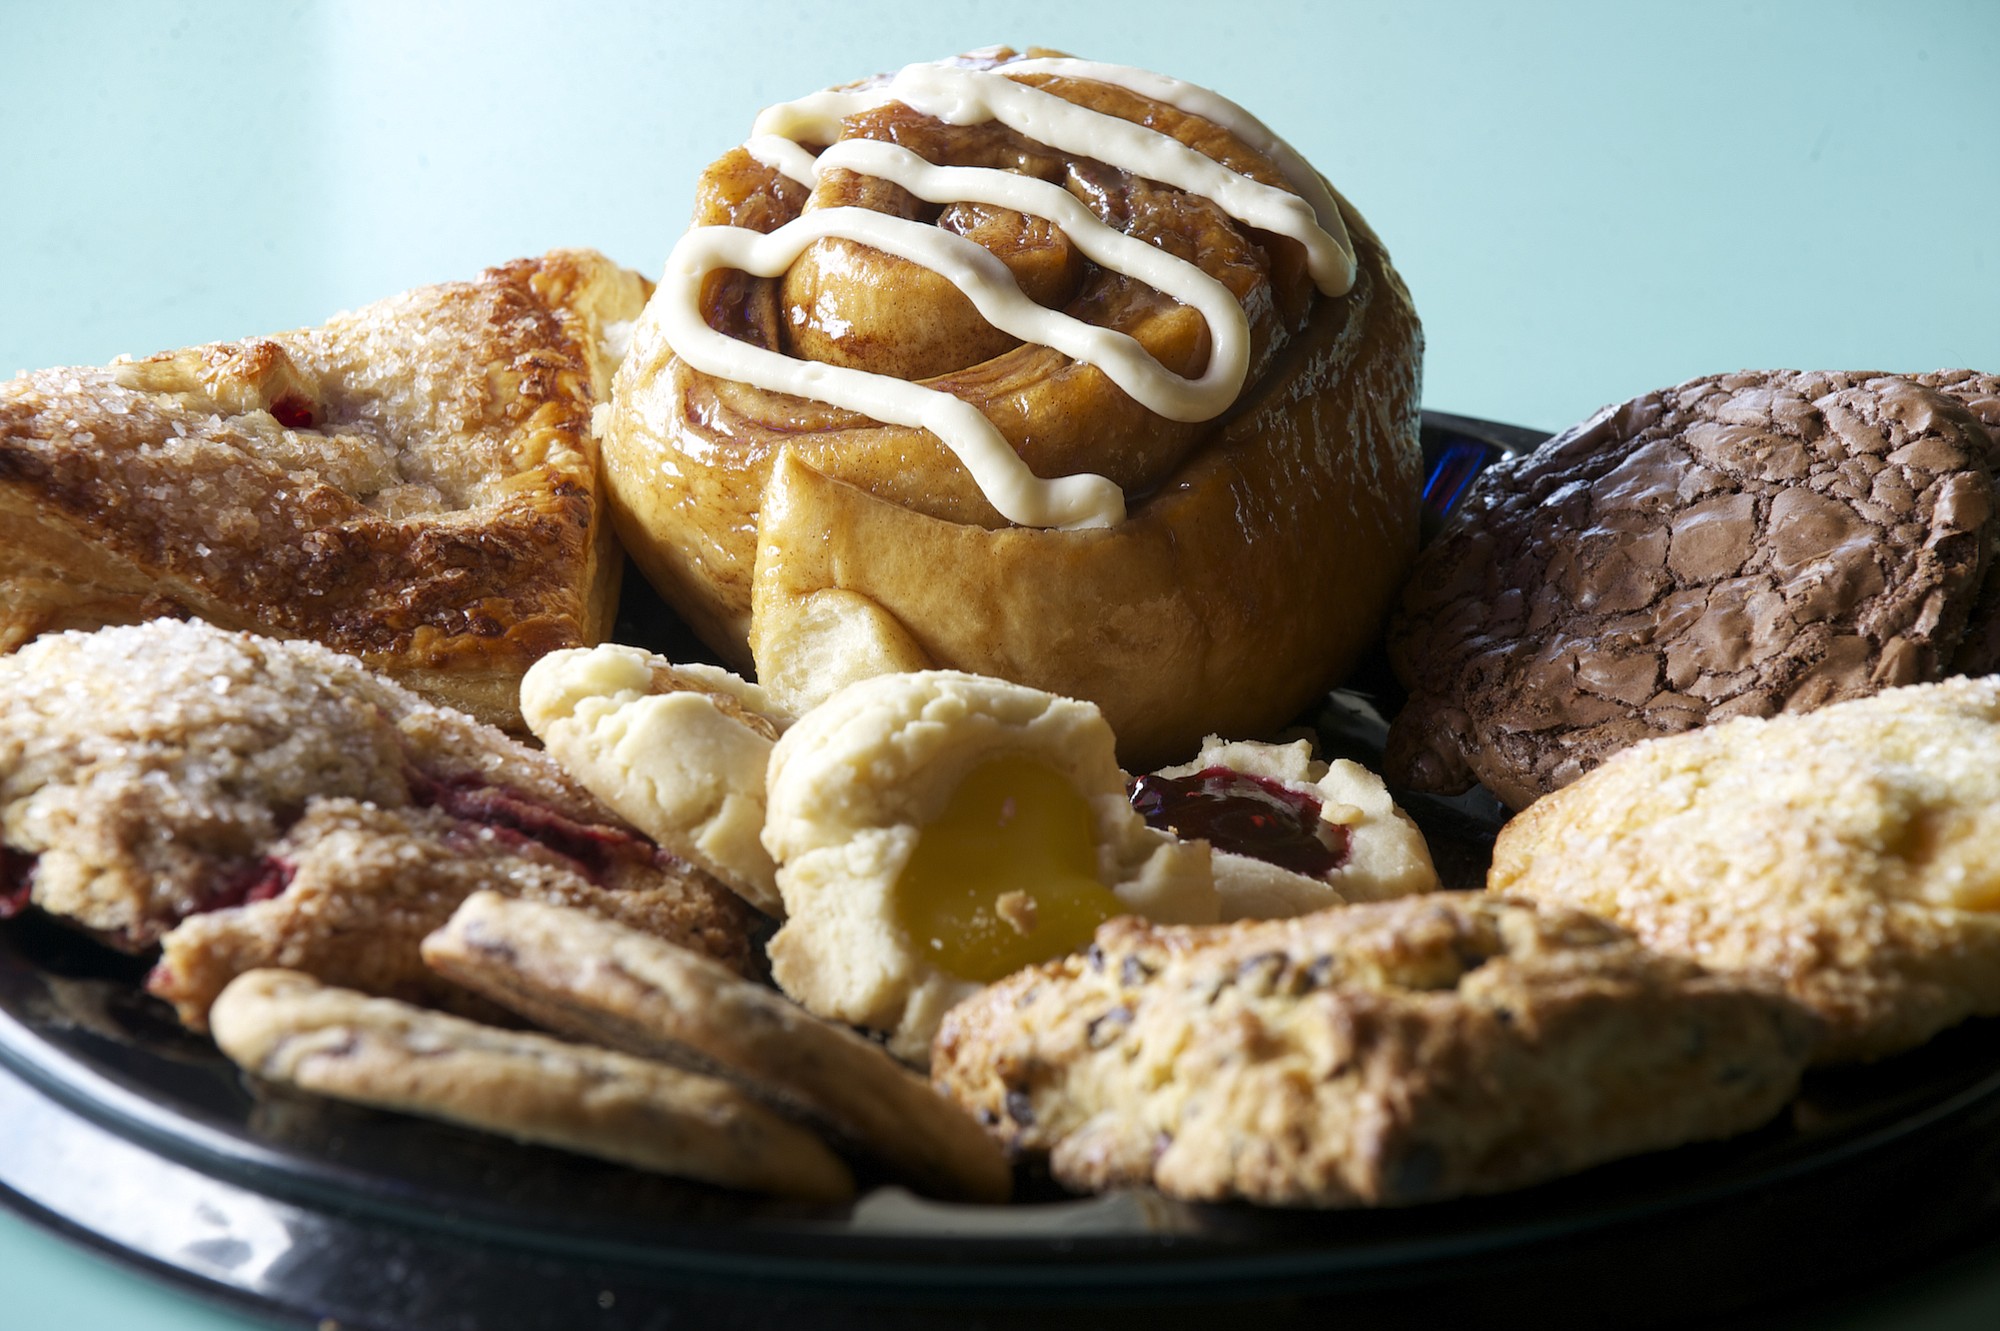 Breakfast in bed is a comfortable gesture, with an assortment of baked goods from House of the Rising Buns Bakery.